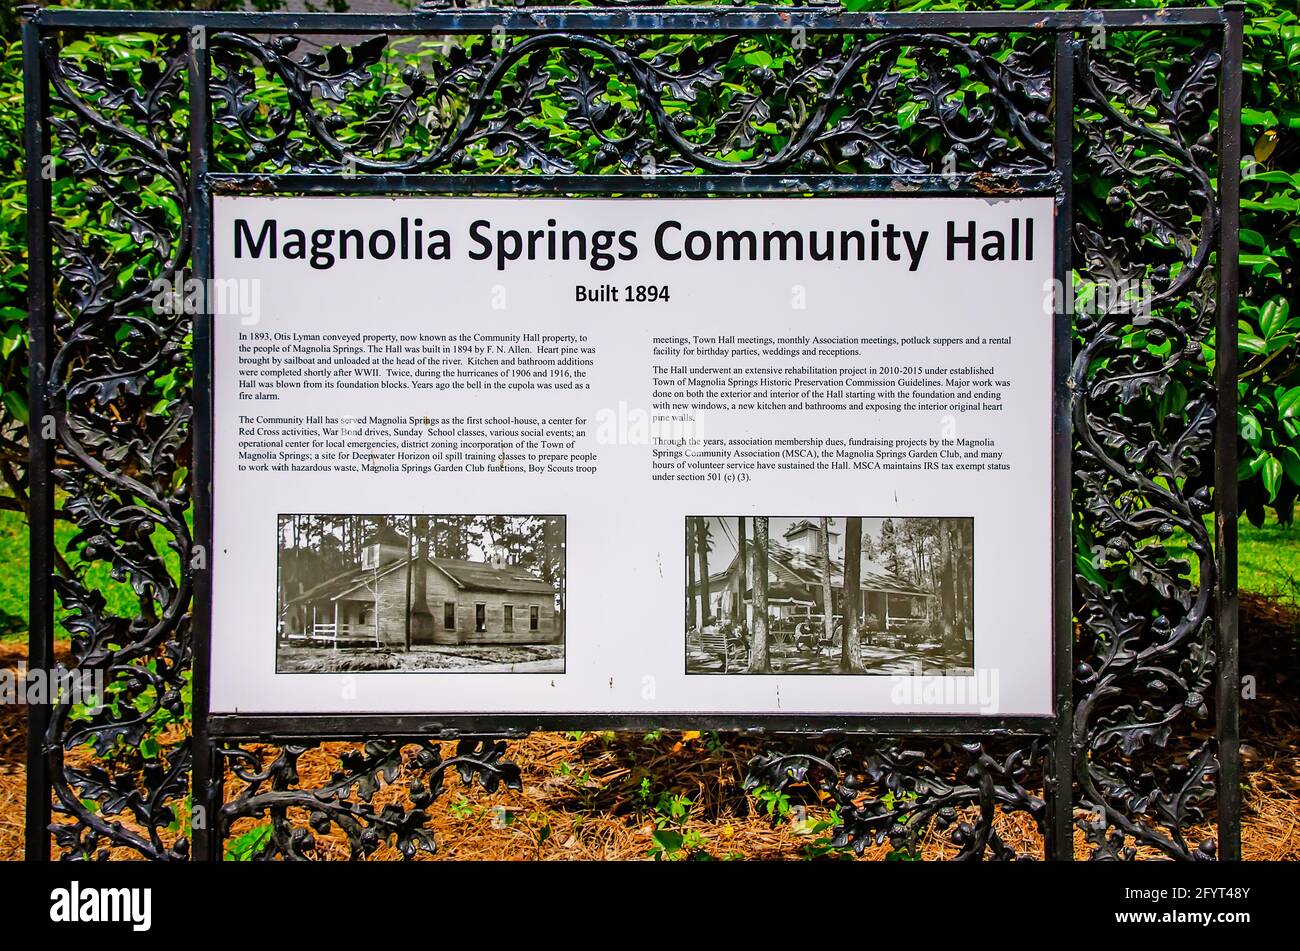 A sign giving information about Magnolia Springs Community Hall is pictured, May 27, 2021, in Magnolia Springs, Alabama. Stock Photo